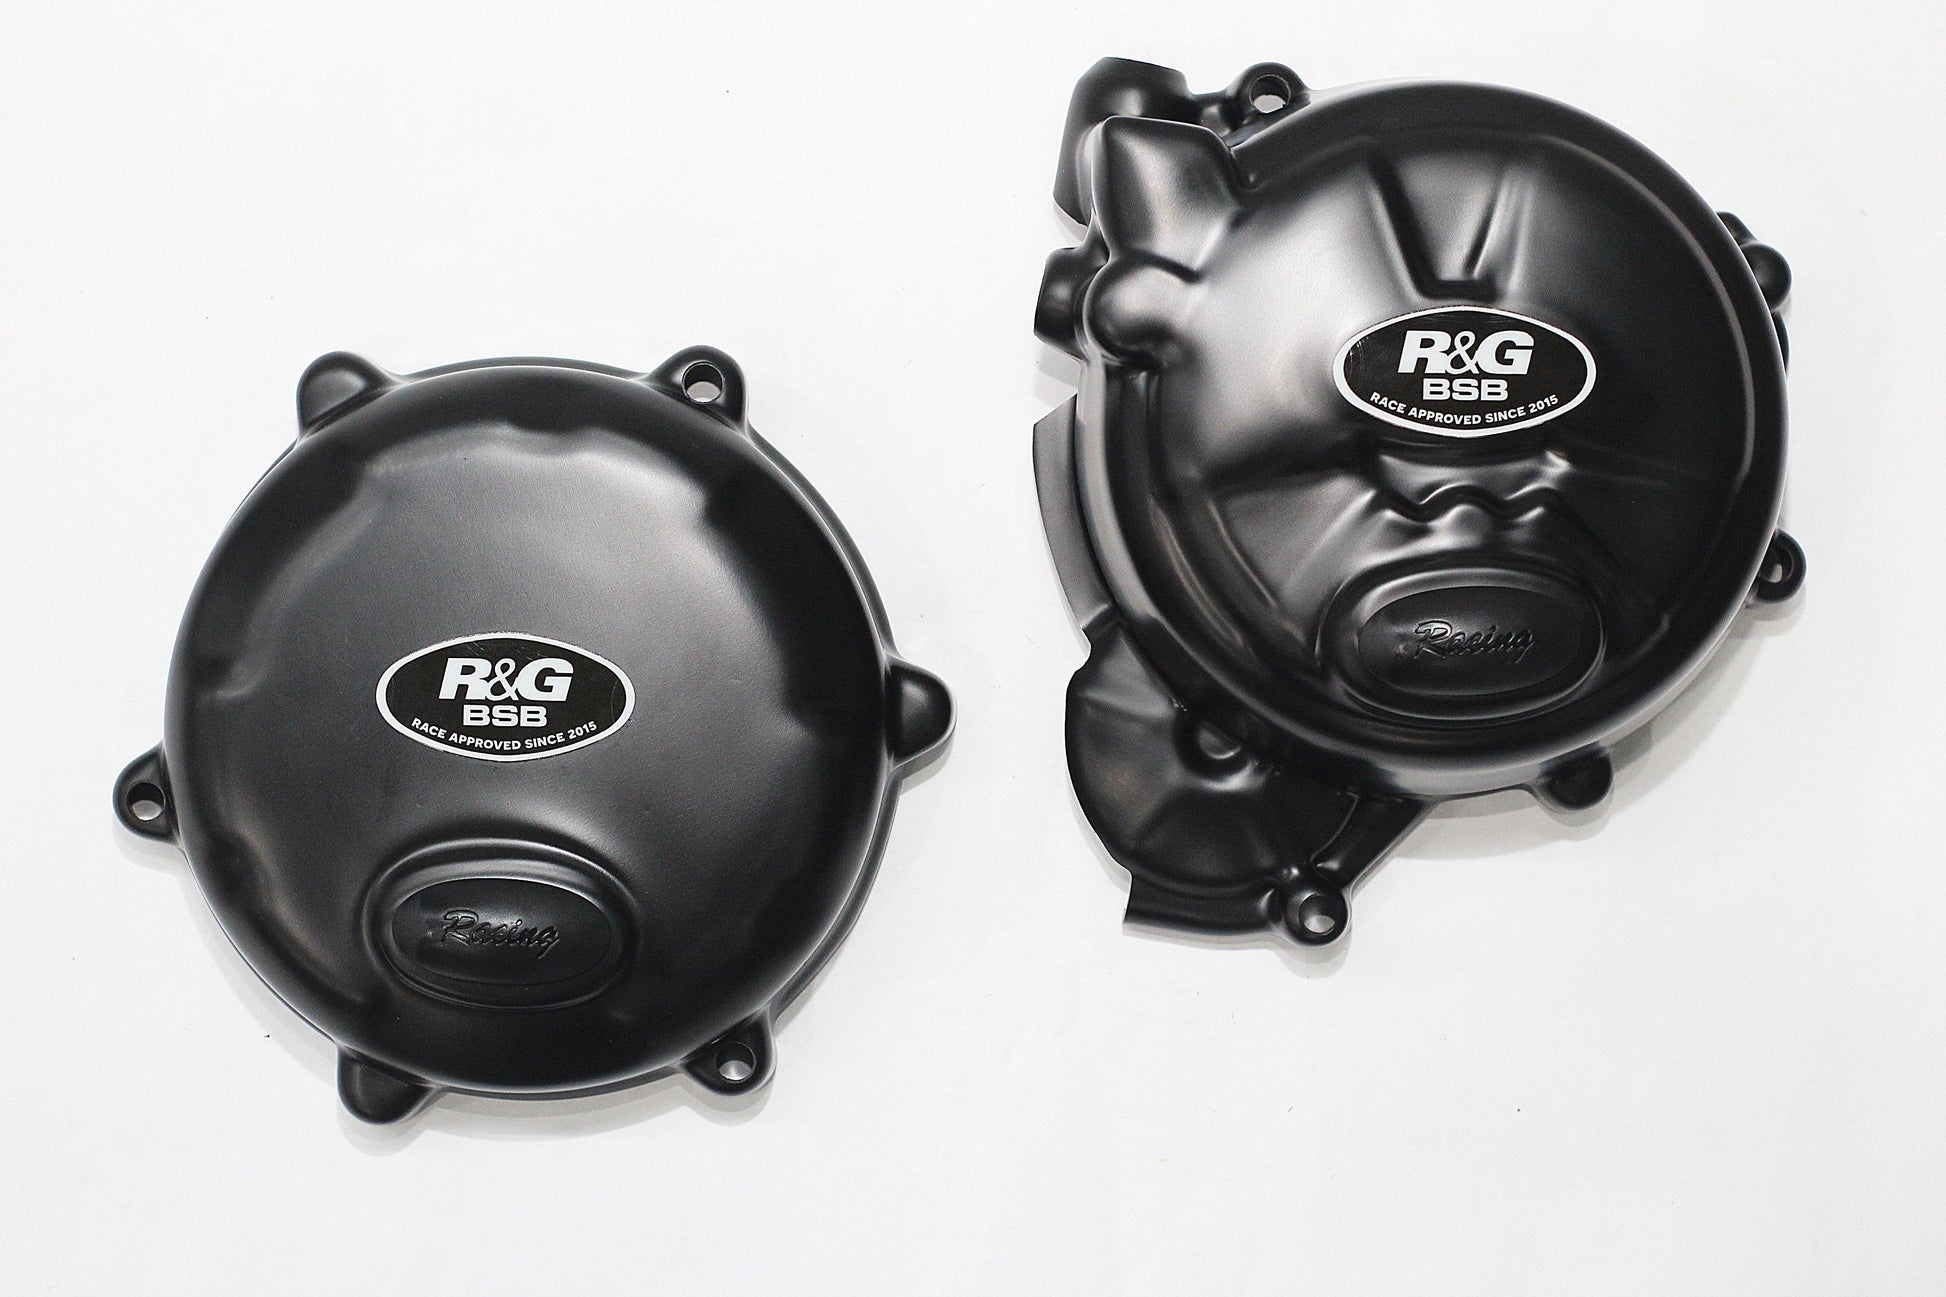 R&G Engine Case Cover Race Kit (2pcs) fits for Ducati 1199 Panigale & 1299 Panigale - Durian Bikers